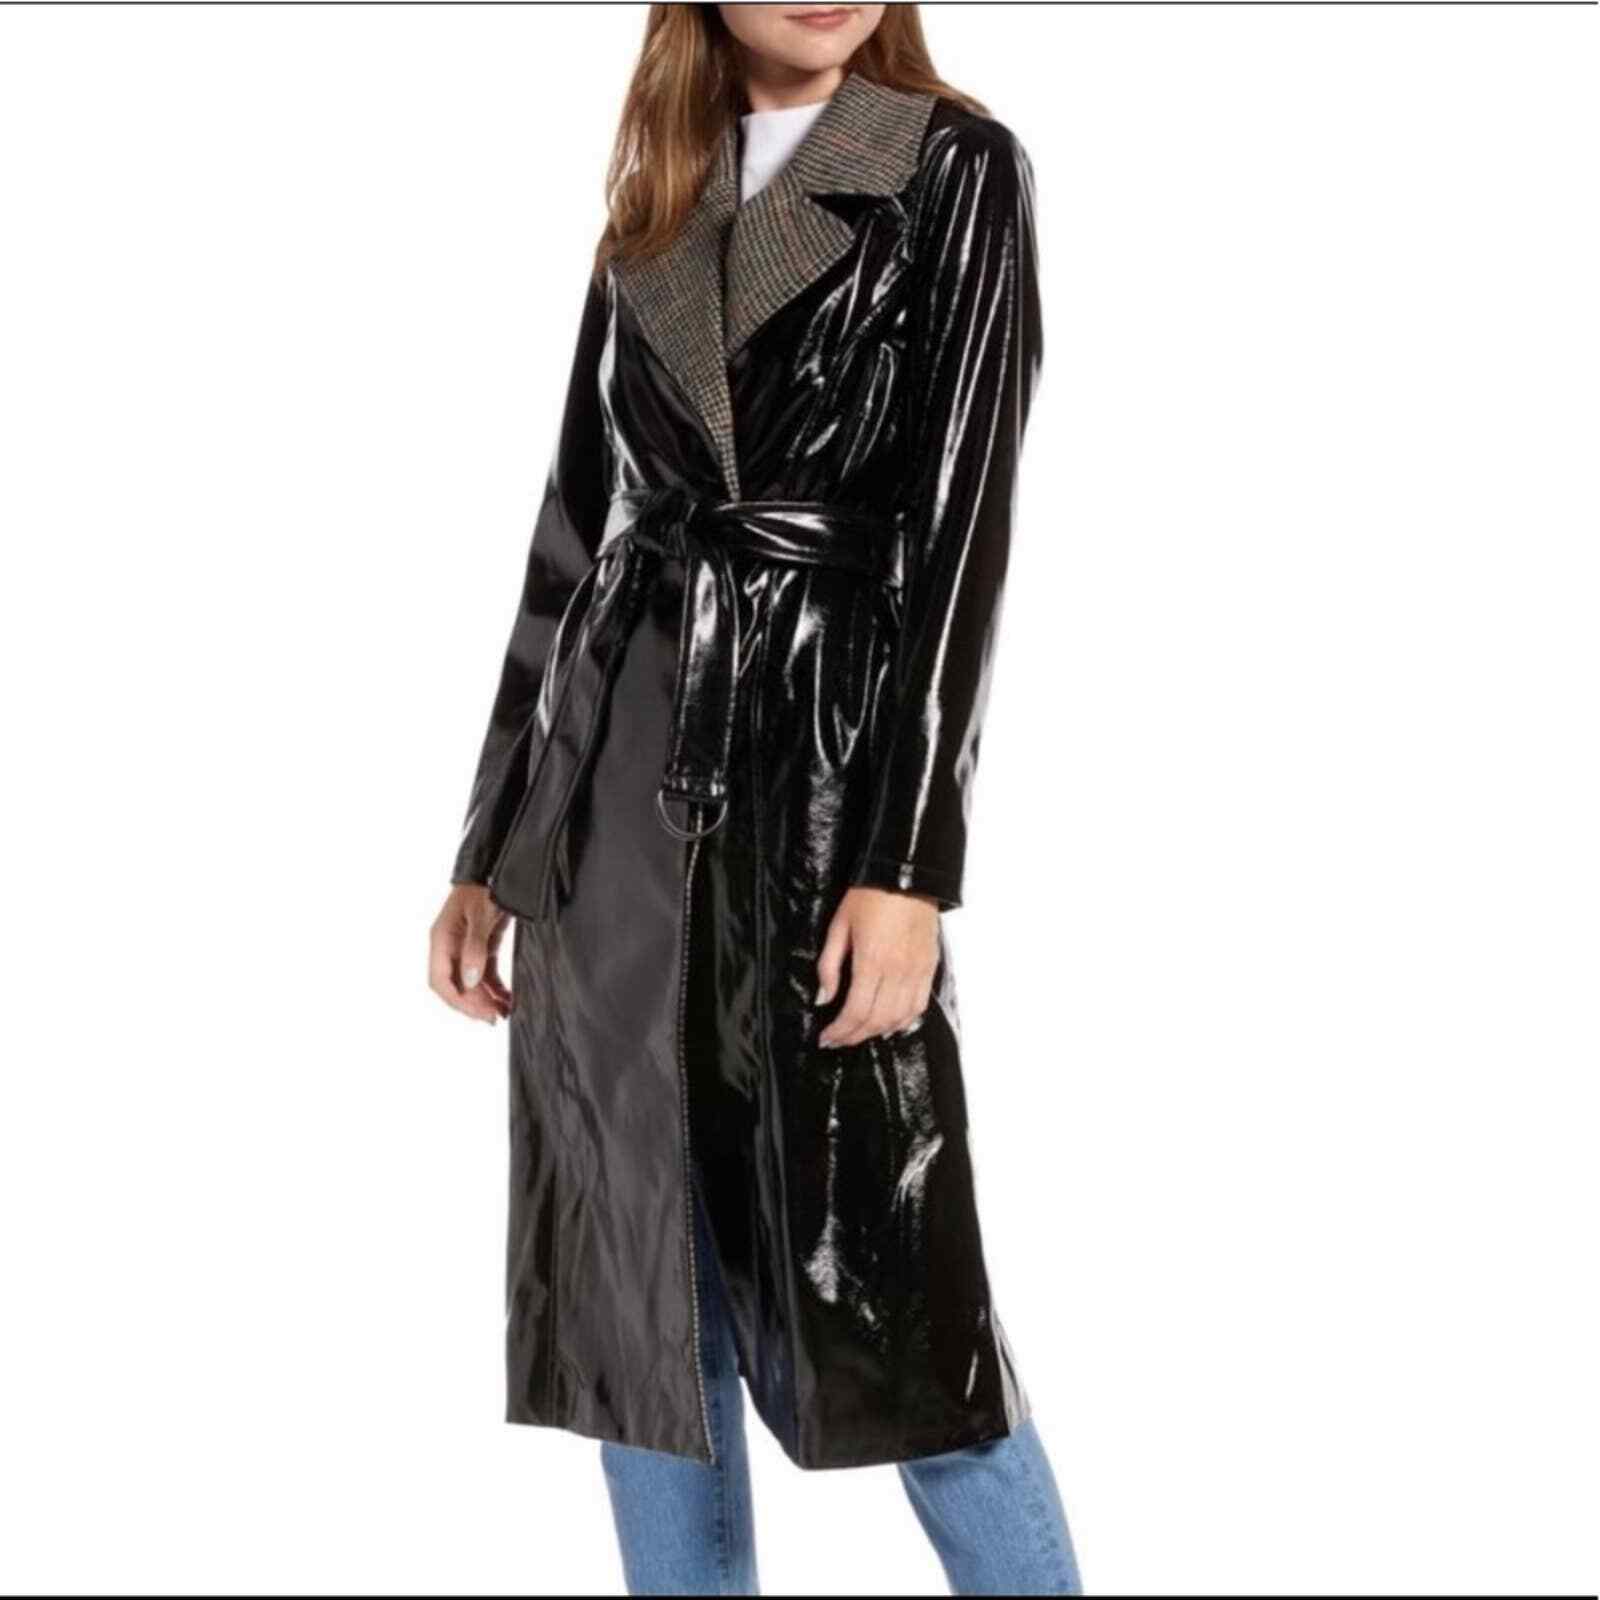 Something Navy Glossy Trench Coat Plaid Collar, Black, Small, NWOT, MSRP $179